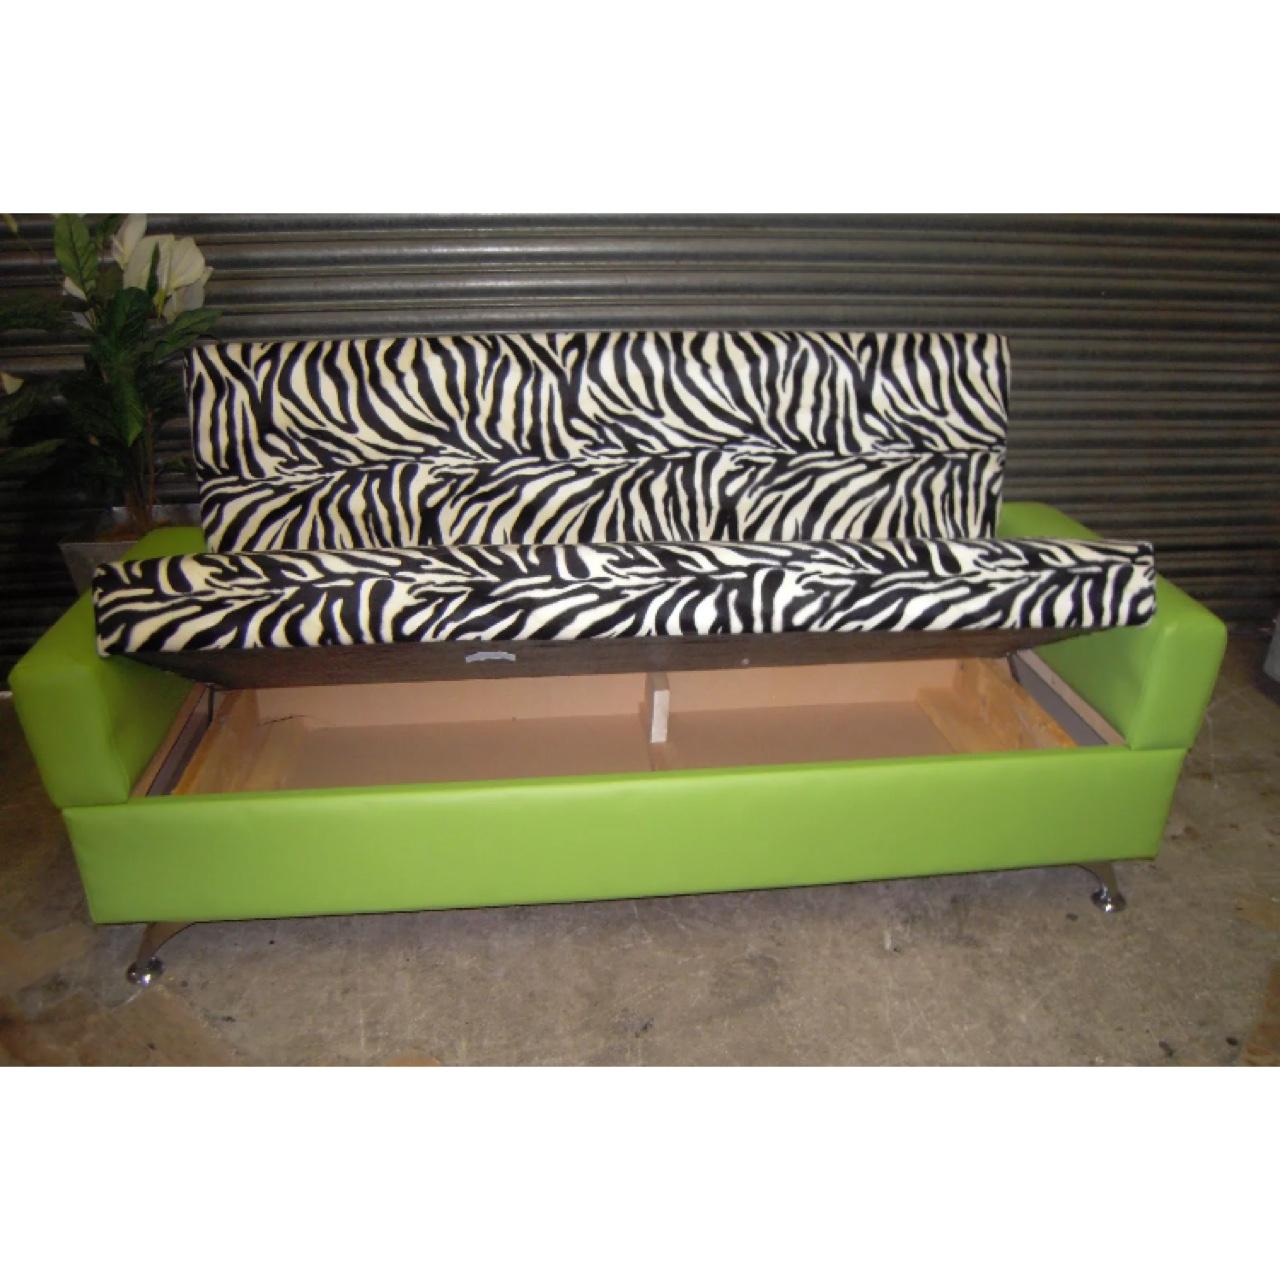 Lime Green Zebra Print Sofa Bed With